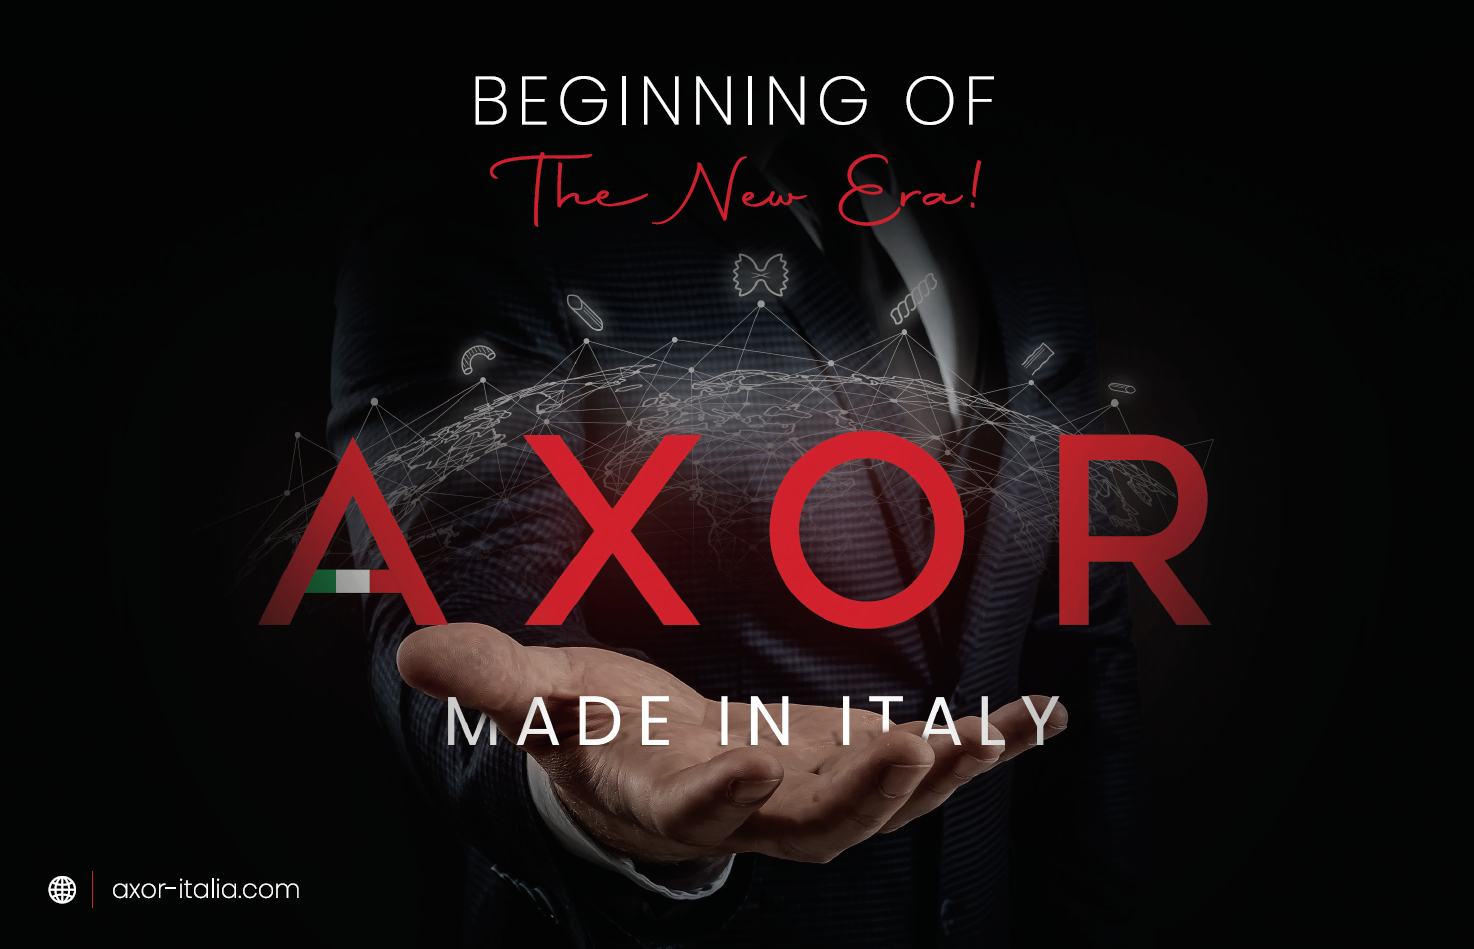 AXOR LAUNCHES NEW LOGO, TAKING THE NEXT STEP FOR THE BRAND
